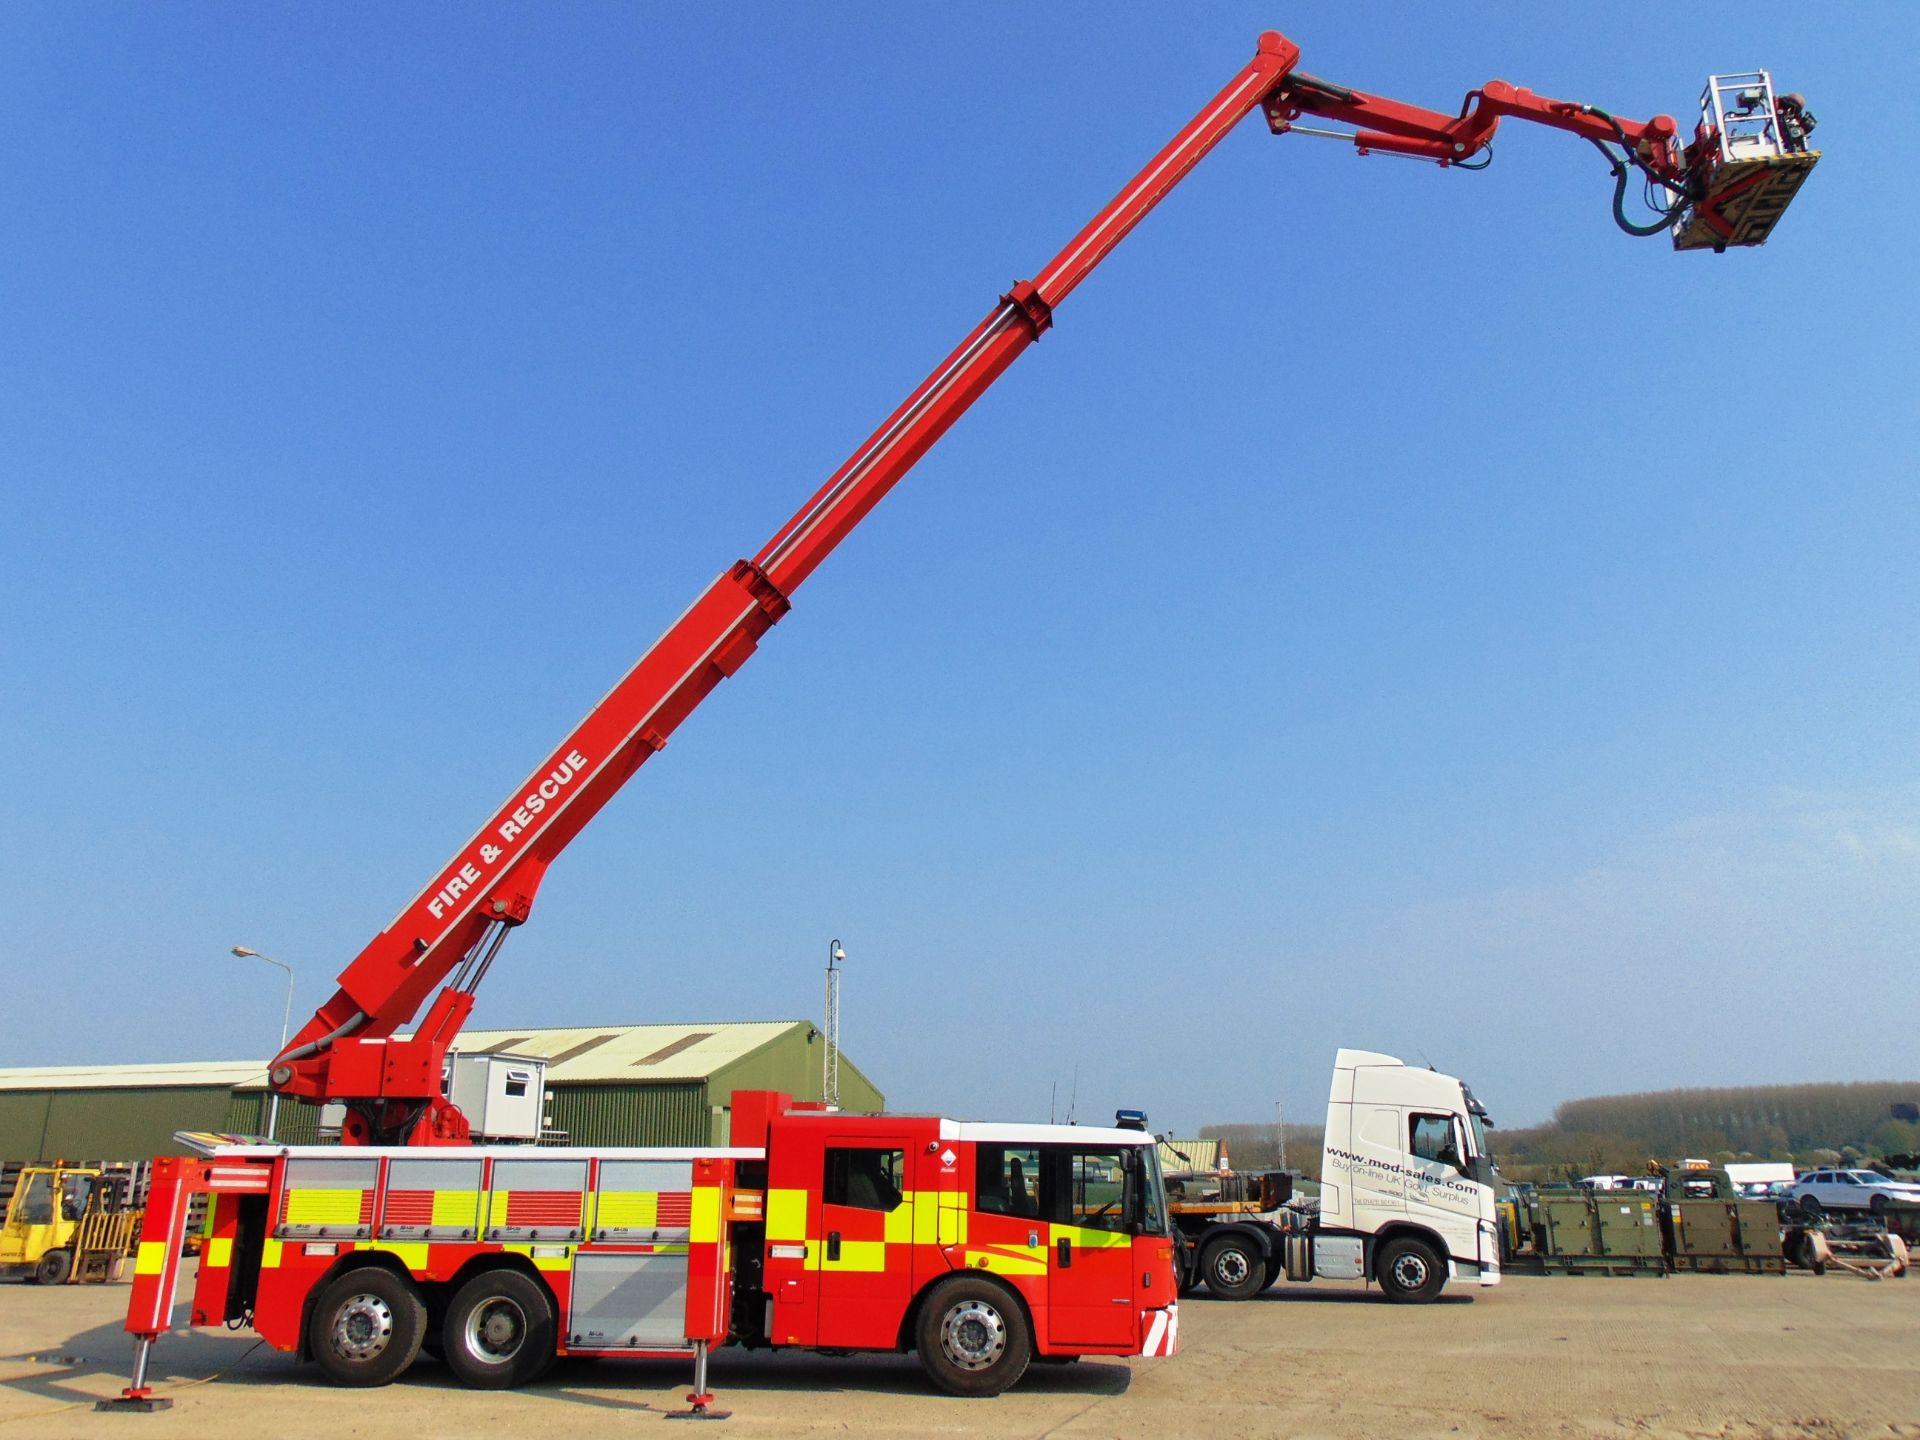 2008 Mercedes Econic CARP (Combined Aerial Rescue Pump) 6x2 Aerial Work Platform / Fire Appliance - Image 4 of 49